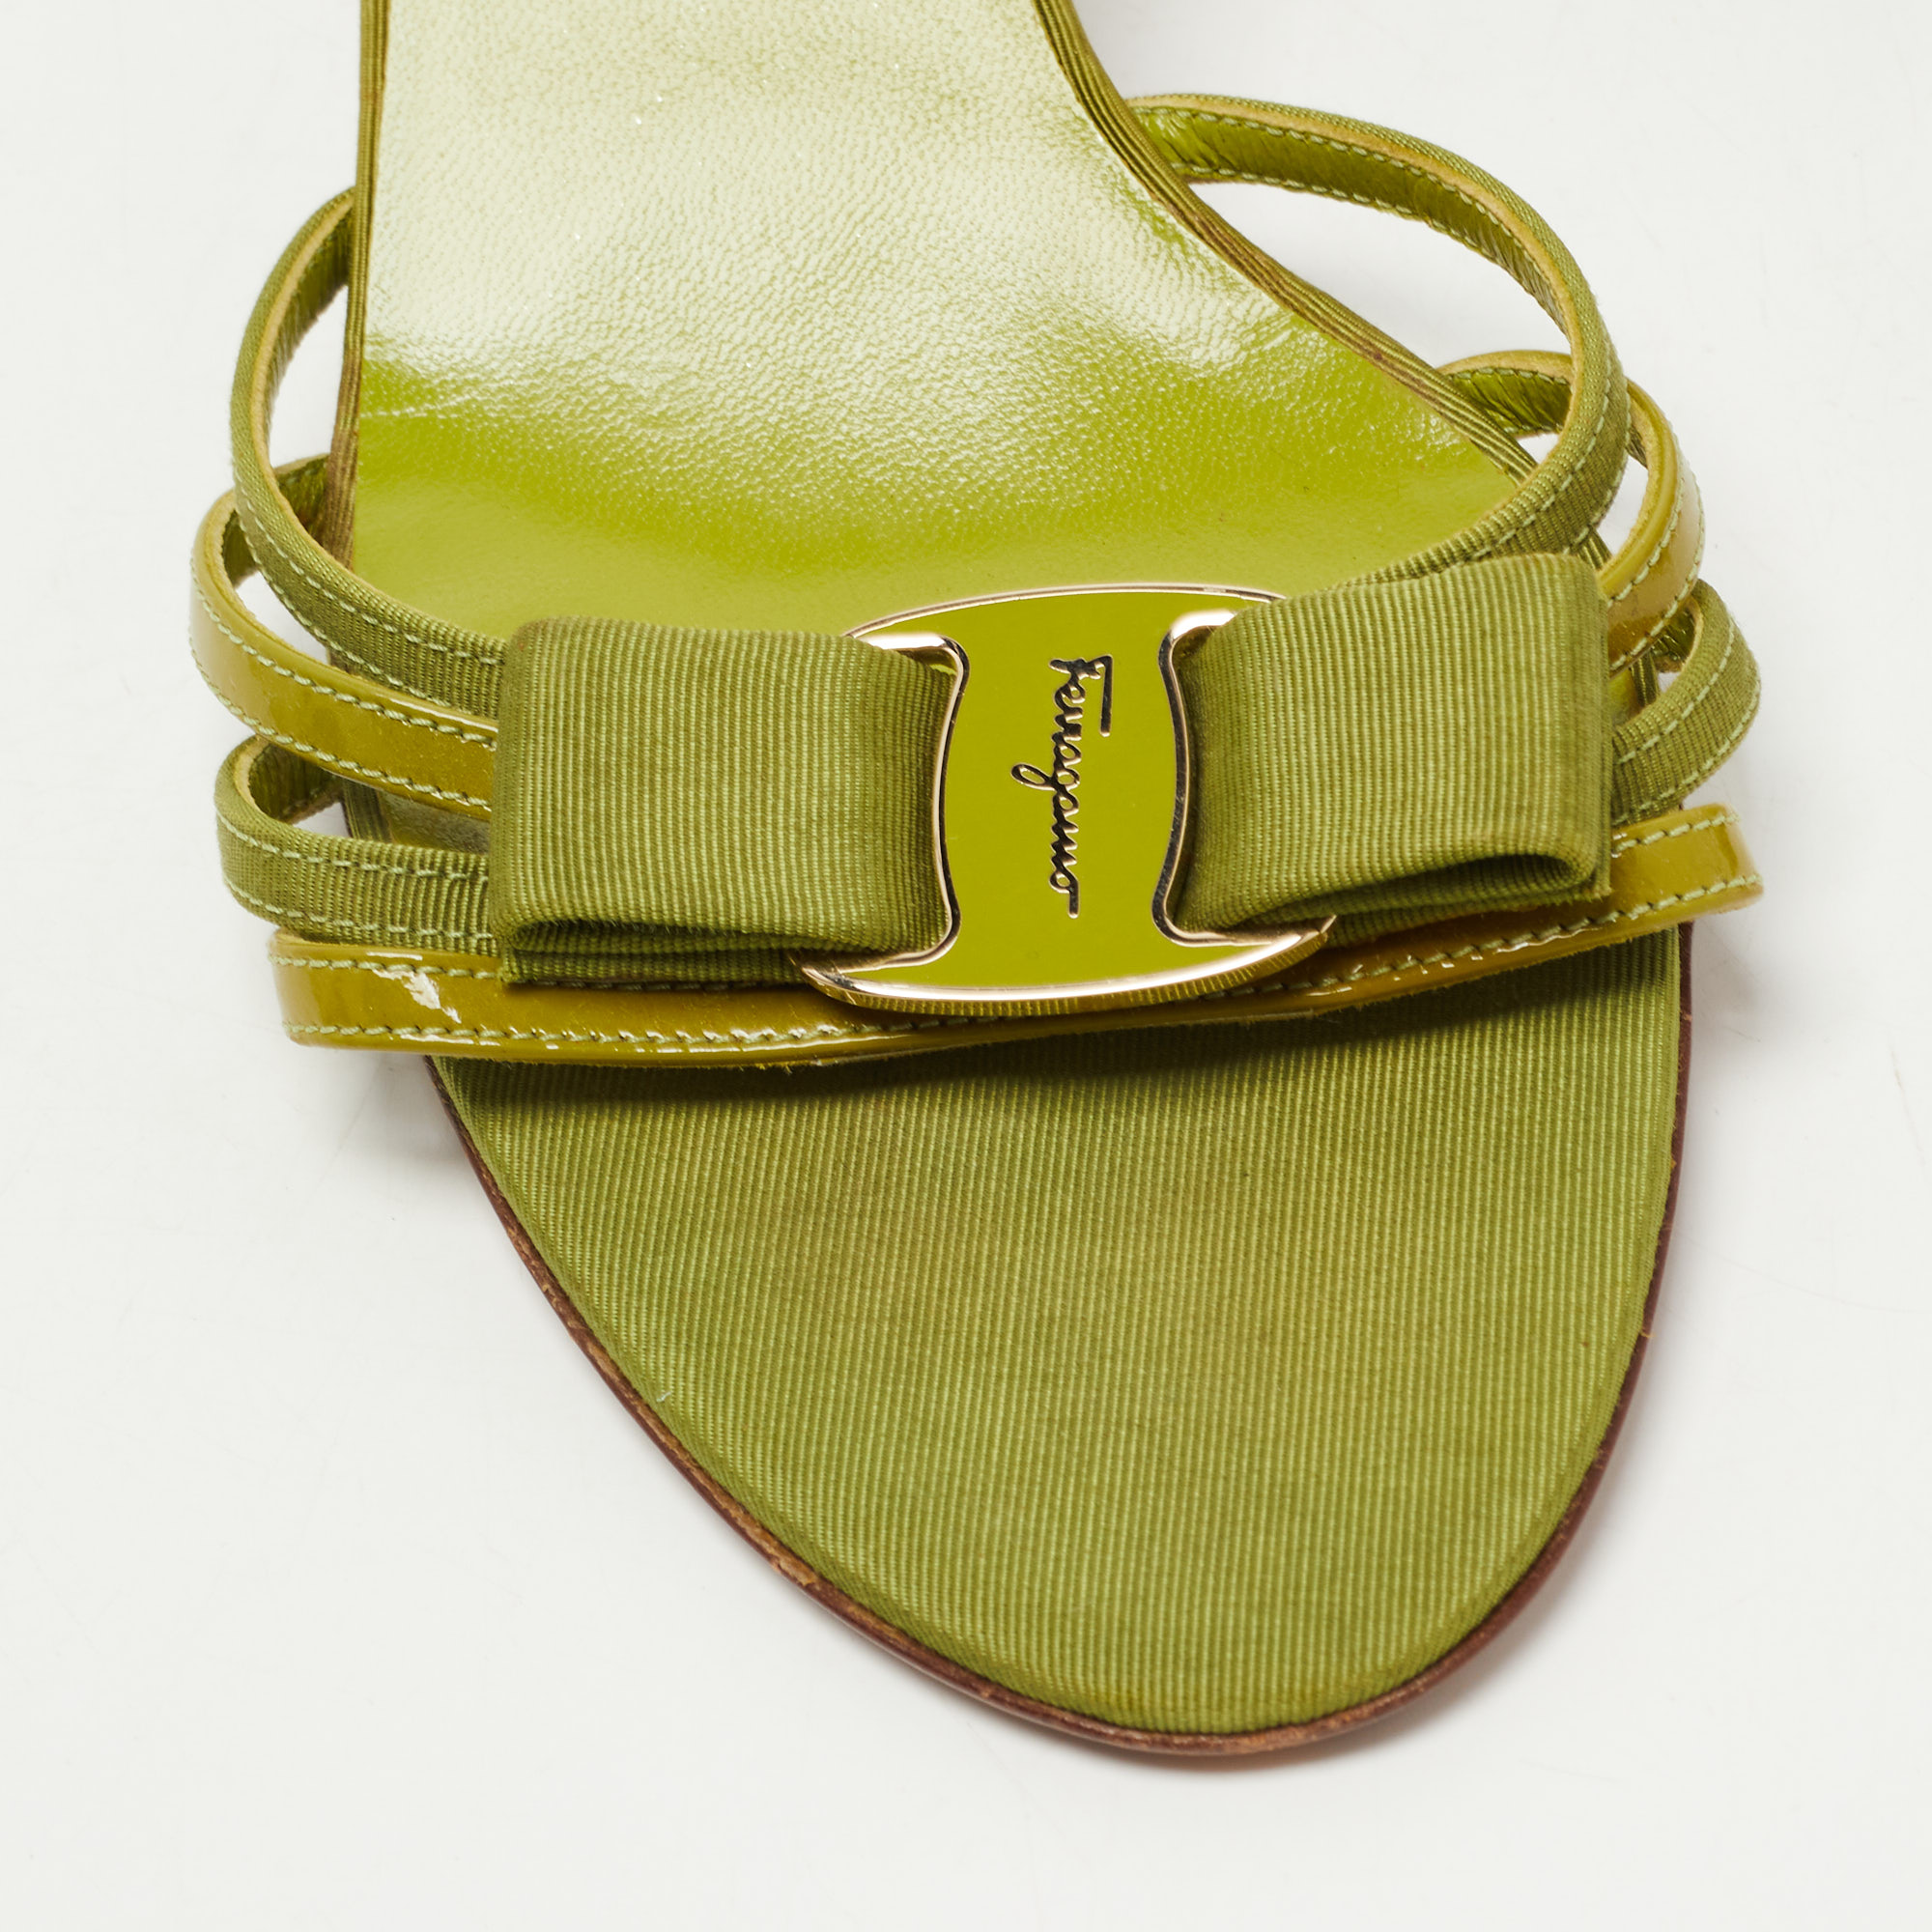 Salvatore Ferragamo Green Patent Leather And Canvas Vara Bow Strappy Slide Sandals Size 40.5